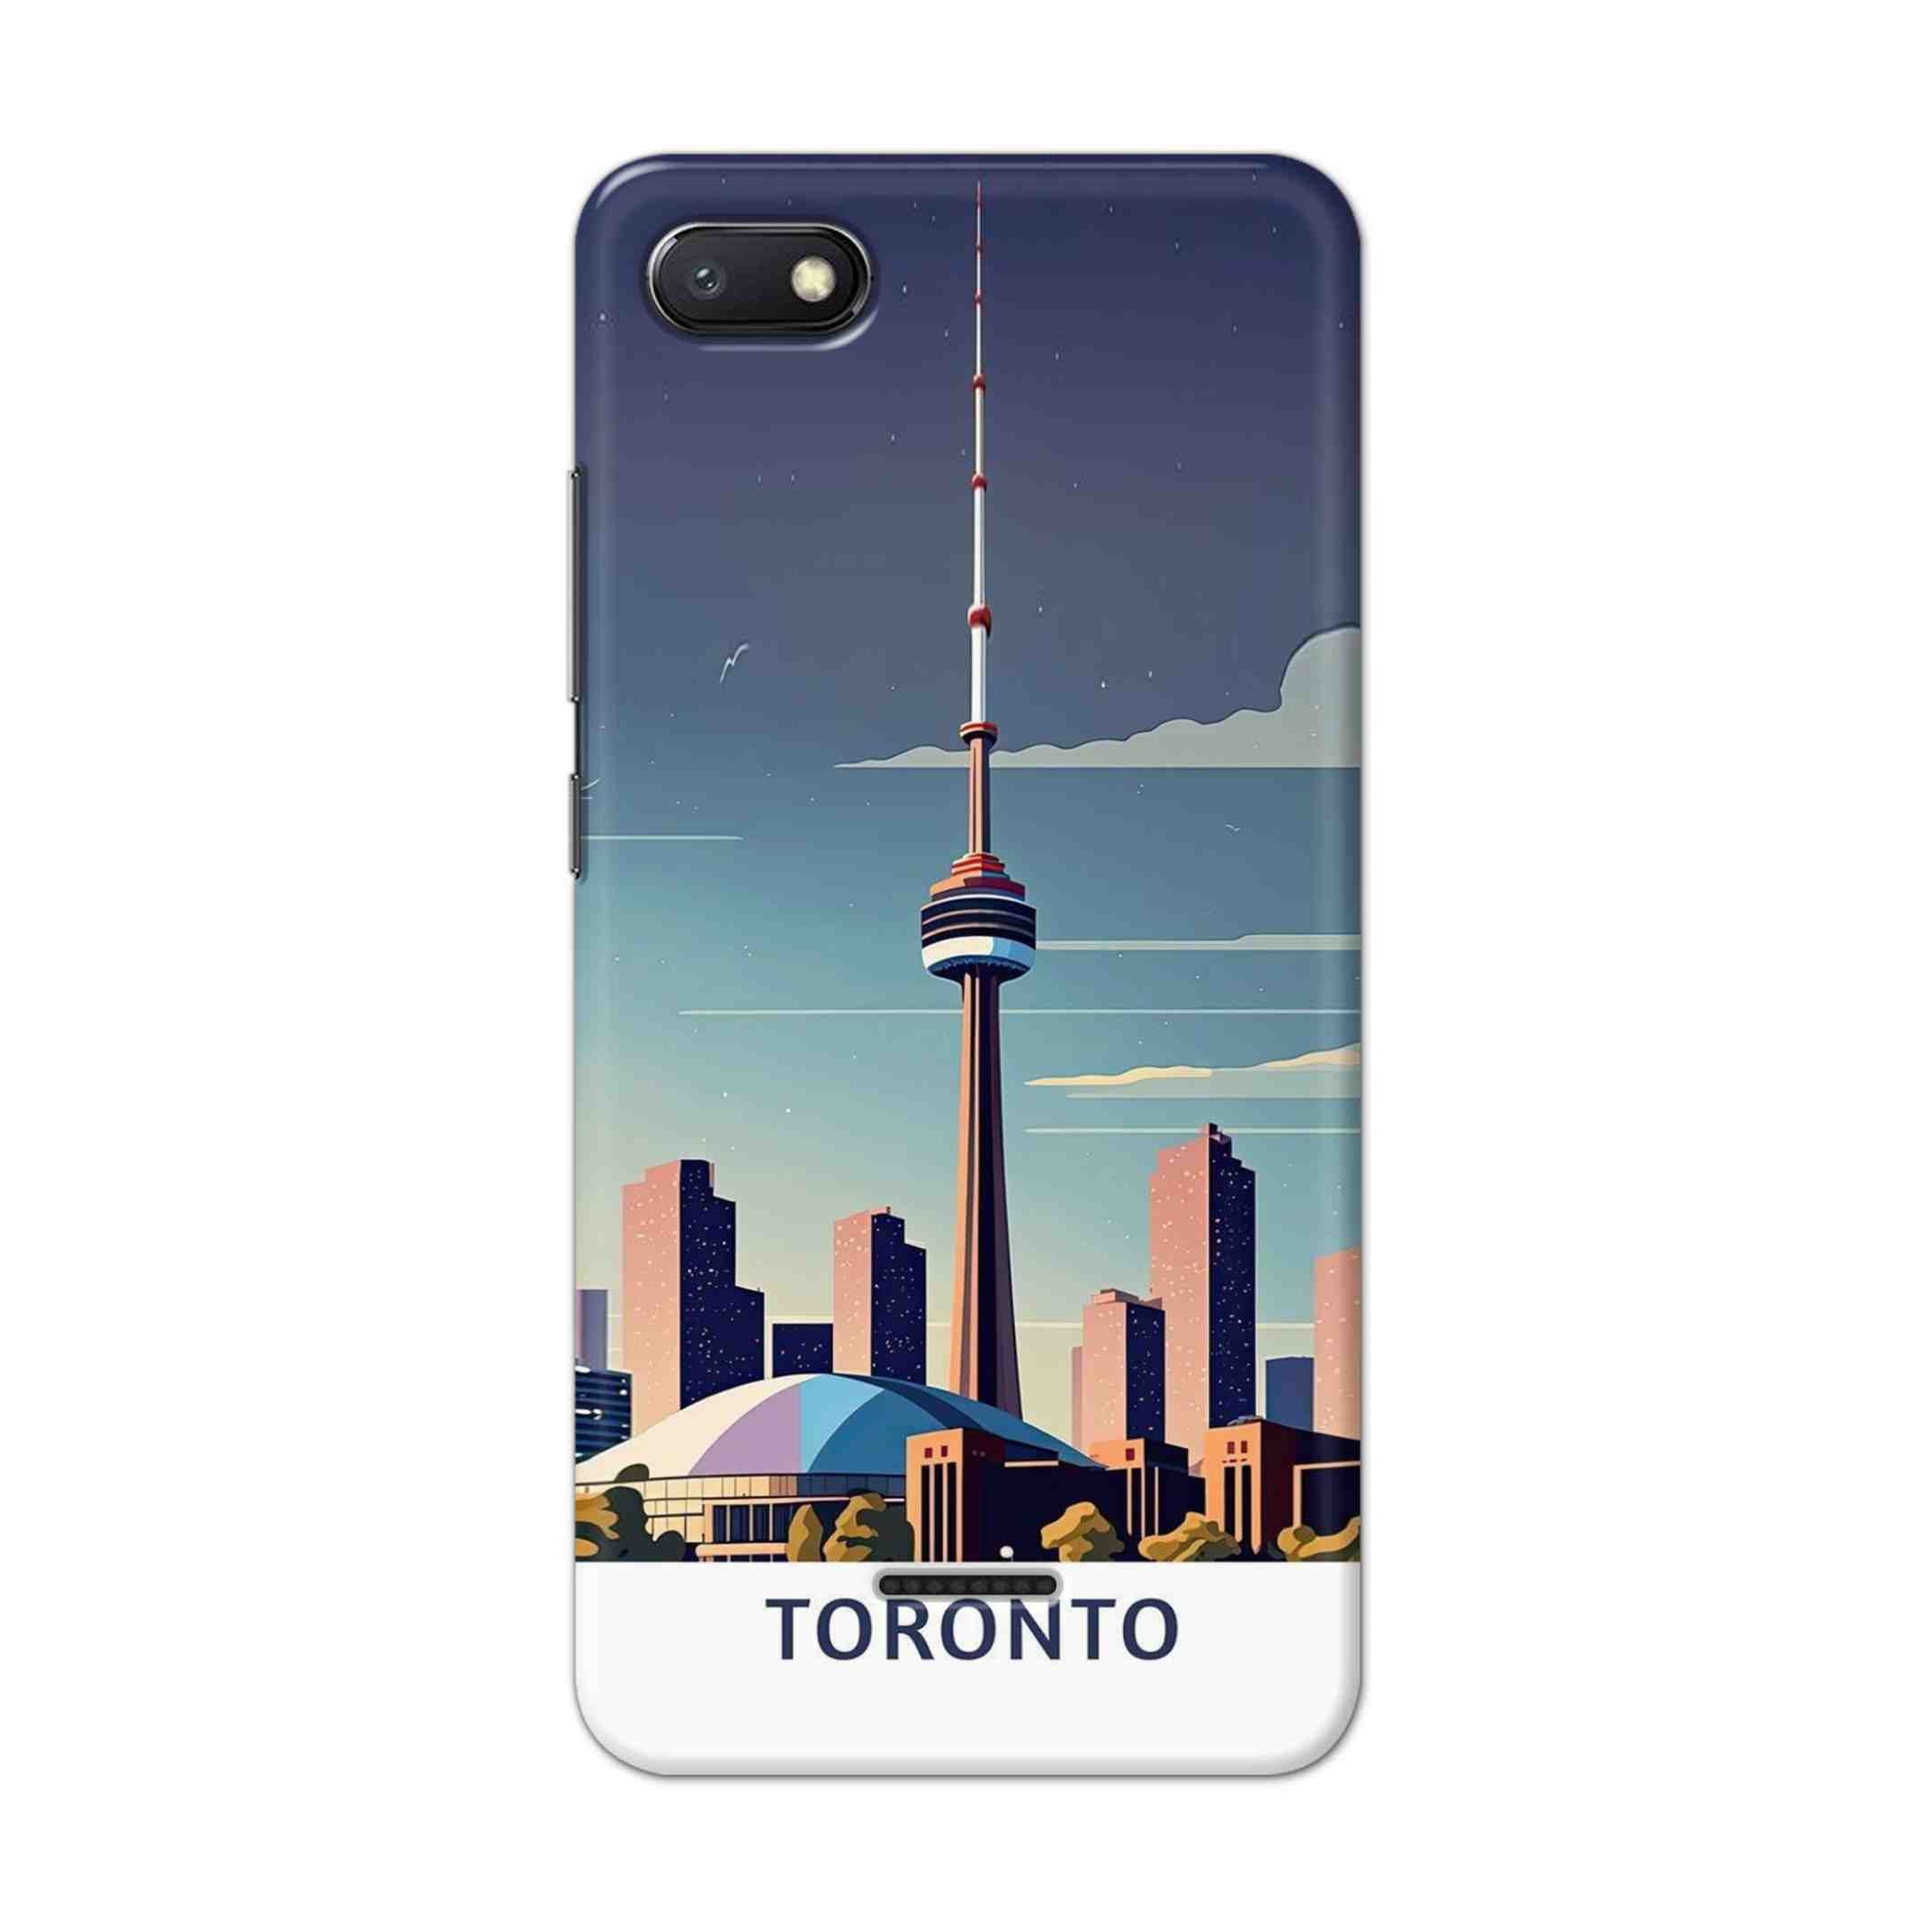 Buy Toronto Hard Back Mobile Phone Case/Cover For Xiaomi Redmi 6A Online